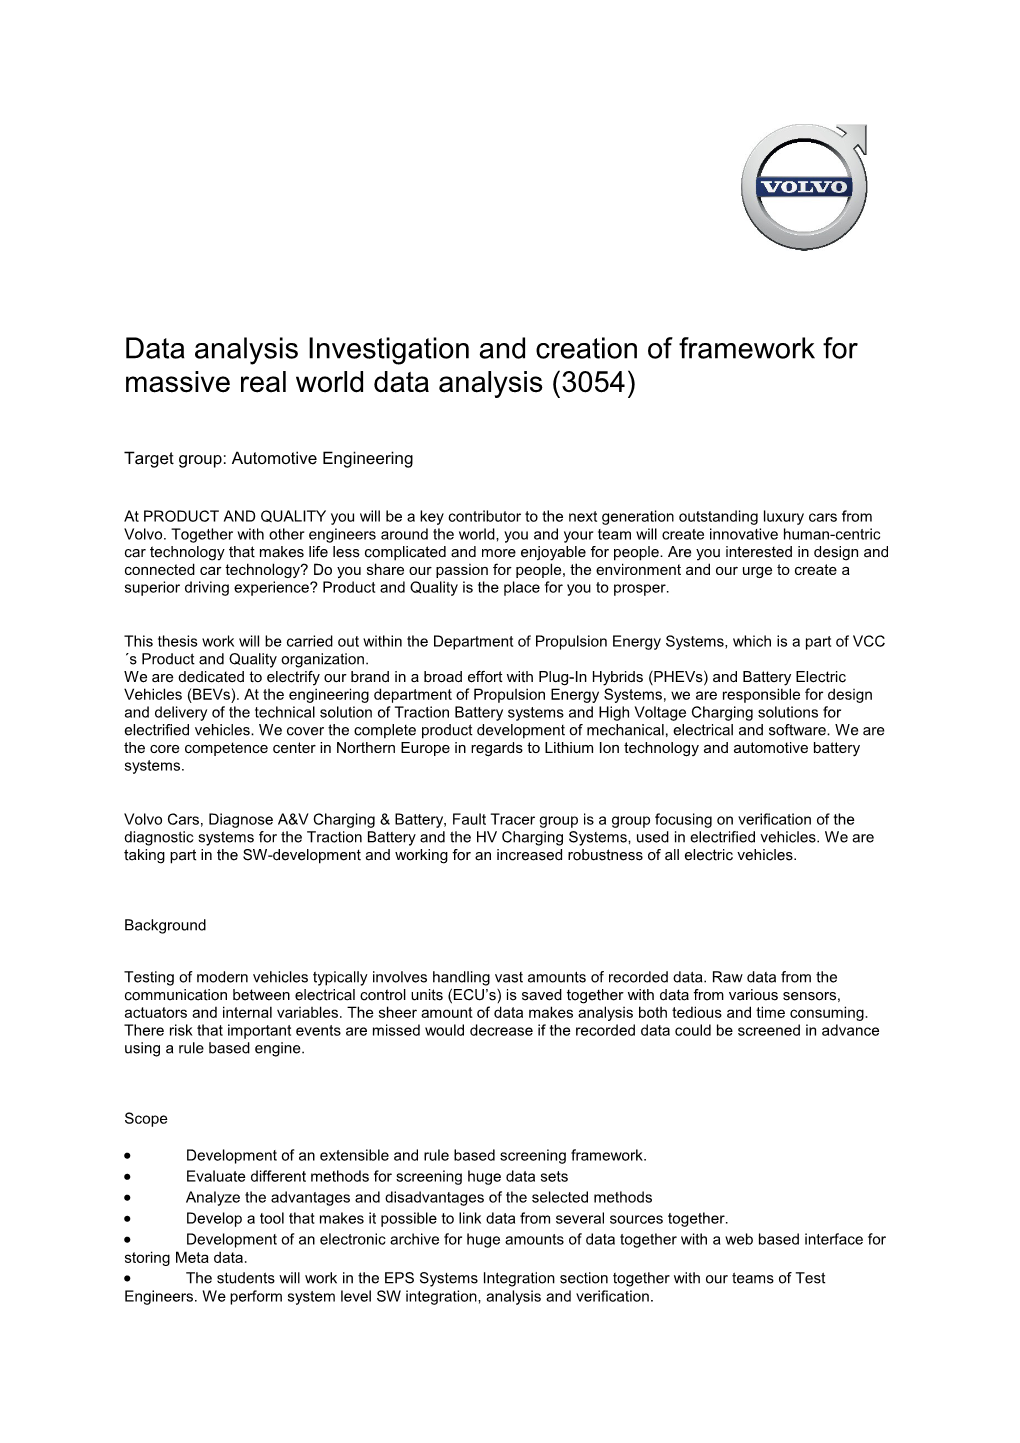 Data Analysis Investigation and Creation of Framework for Massive Real World Data Analysis